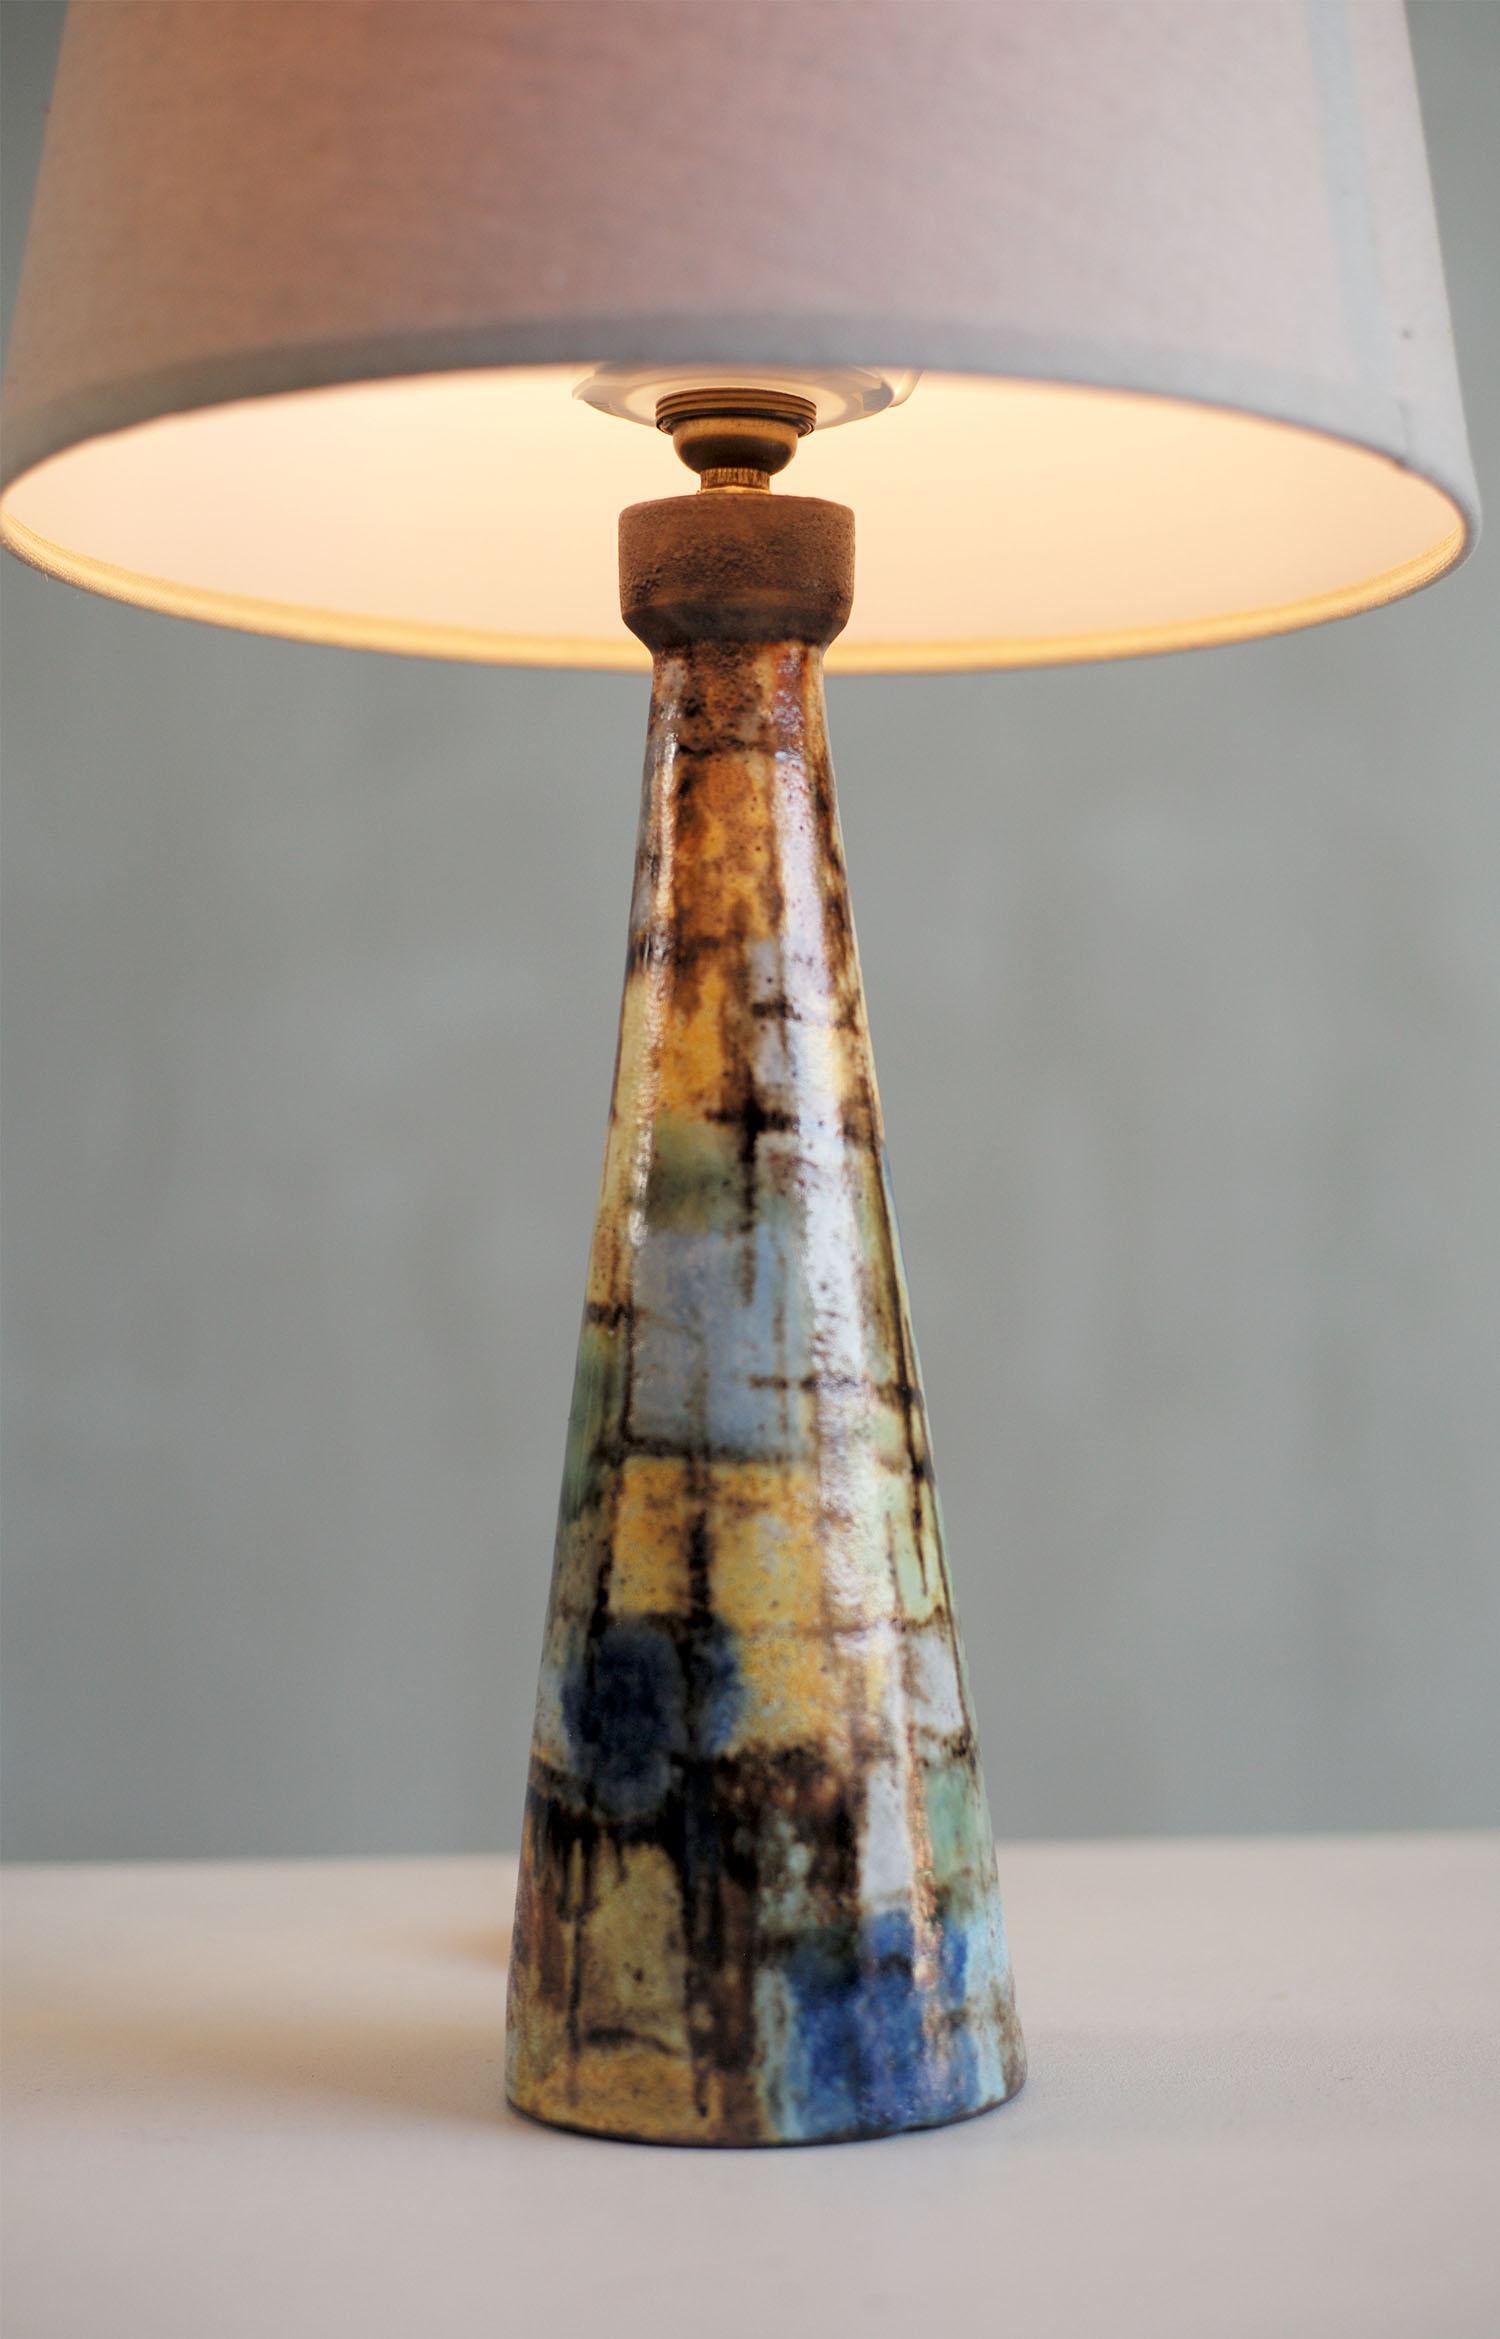 Alexandre Kostanda (1921-2007), Table lamp in enamelled sandstone with abstract patterns, Vallauris 1950. Alternating light blue and ultramarine, yellow and green highlighted with brown lines, this lamp base is signed under the base. Very good